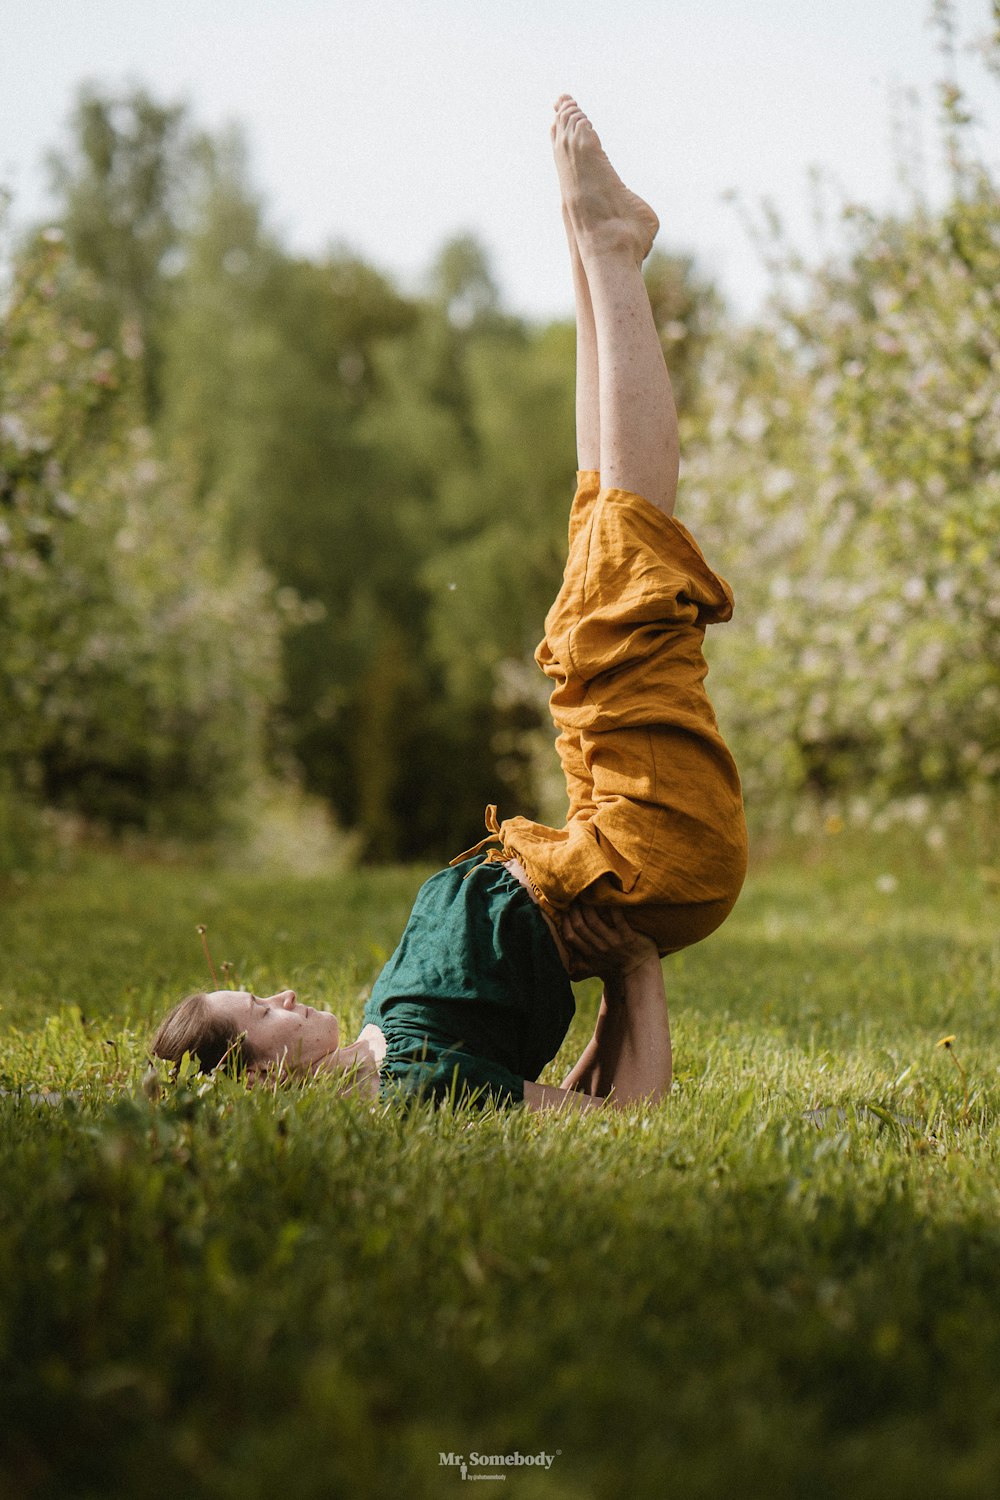 a person doing a handstand in a grassy area